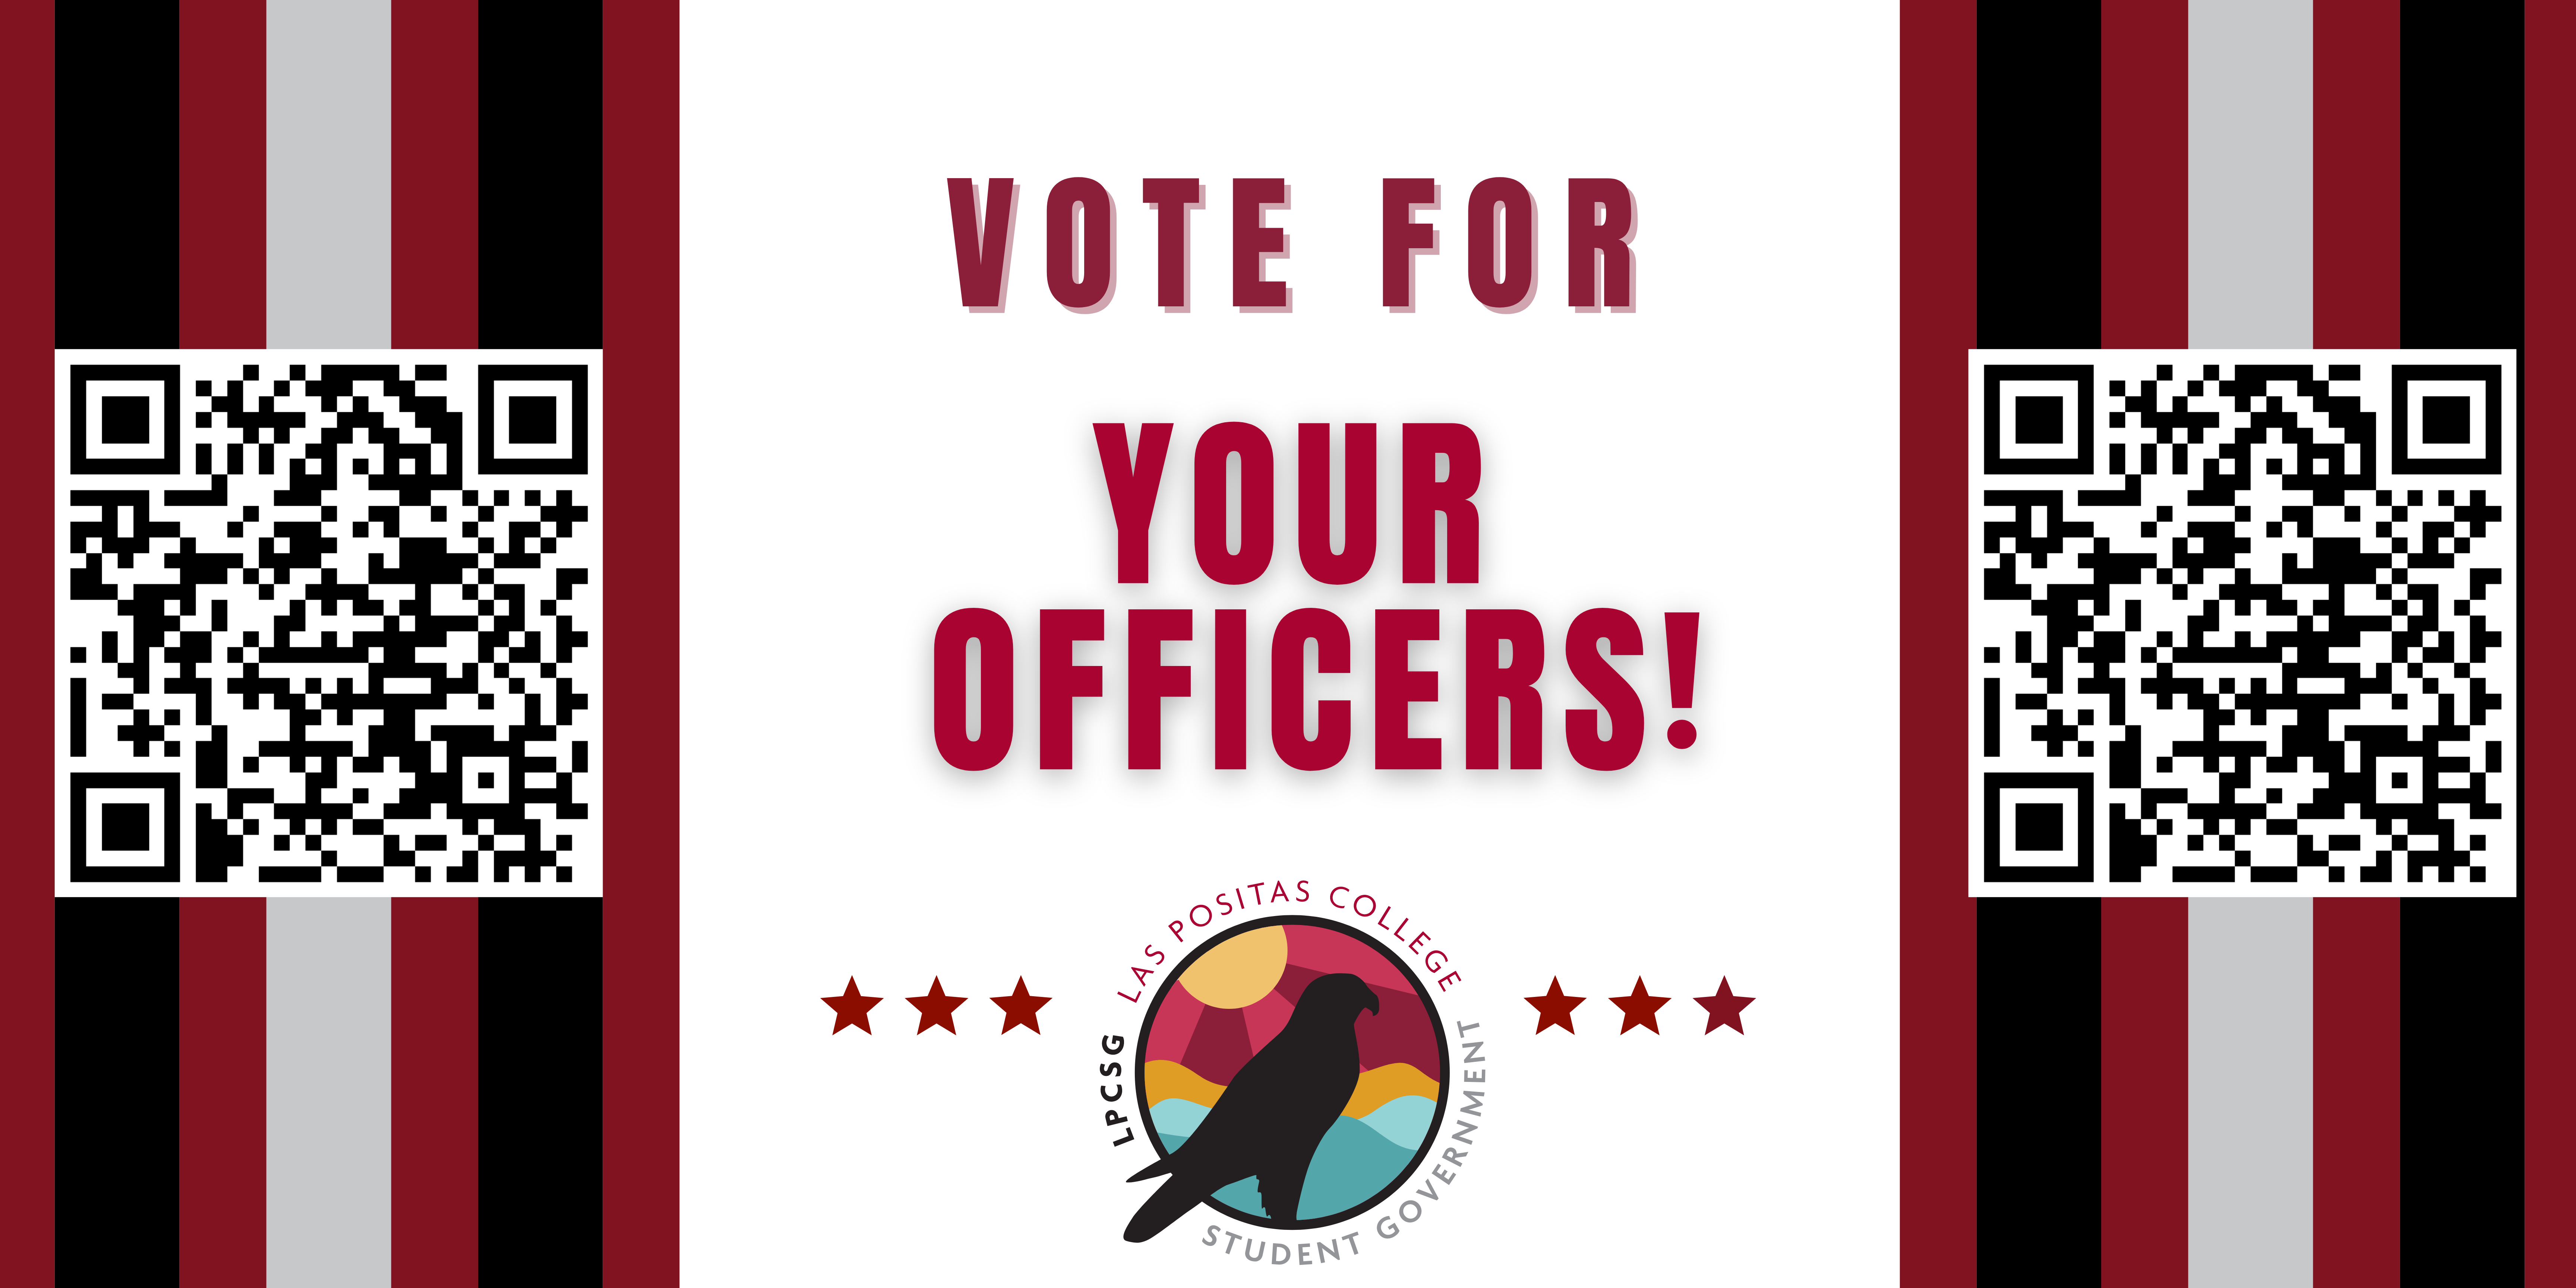 Vote for LPCSG Officers